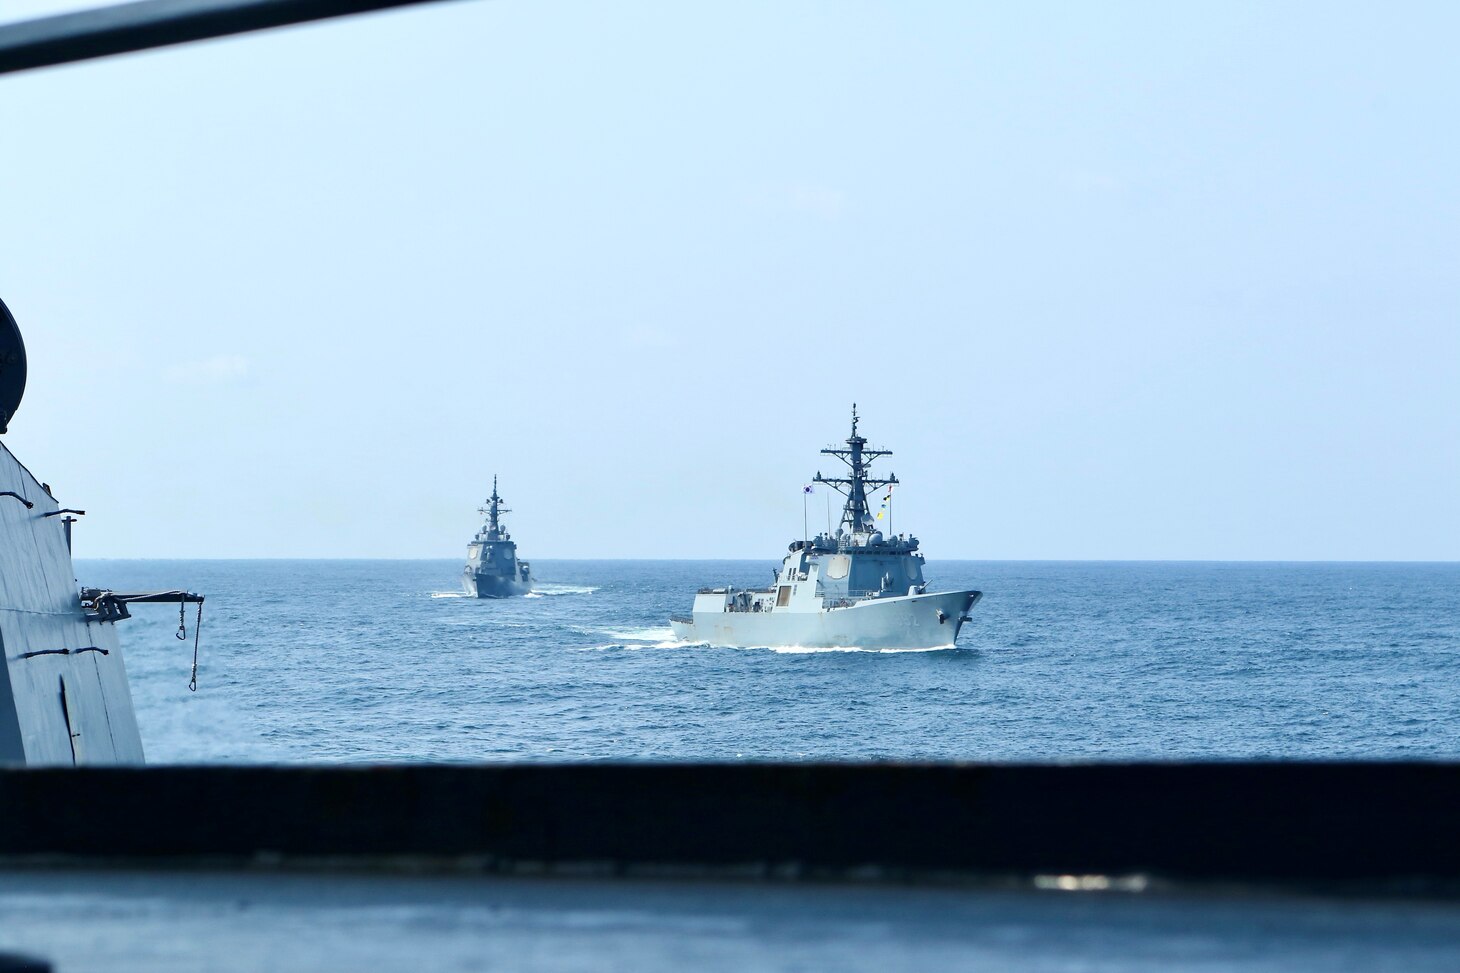 Japan Maritime Self-Defense Force guided-missile destroyer JS Atago (DDG 177) and Republic of Korea Navy Sejong the Great-class destroyer ROKS Yulgoki I (DDH 992) steam alongside the Arleigh Burke-class guided-missile destroyer USS Benfold (DDG 65) during a trilateral maritime exercise focused on ballistic missile defense integration and shipboard maneuvers. Benfold is underway in the U.S. 7th Fleet area of operations as part of Destroyer Squadron 15. U.S. 7th Fleet is the U.S. Navy‘s largest forward-deployed numbered fleet, and routinely interacts and operates with allies and partners in preserving a free and open Indo-Pacific region. (U.S. Navy photo by Seaman Alexis Pelletier)